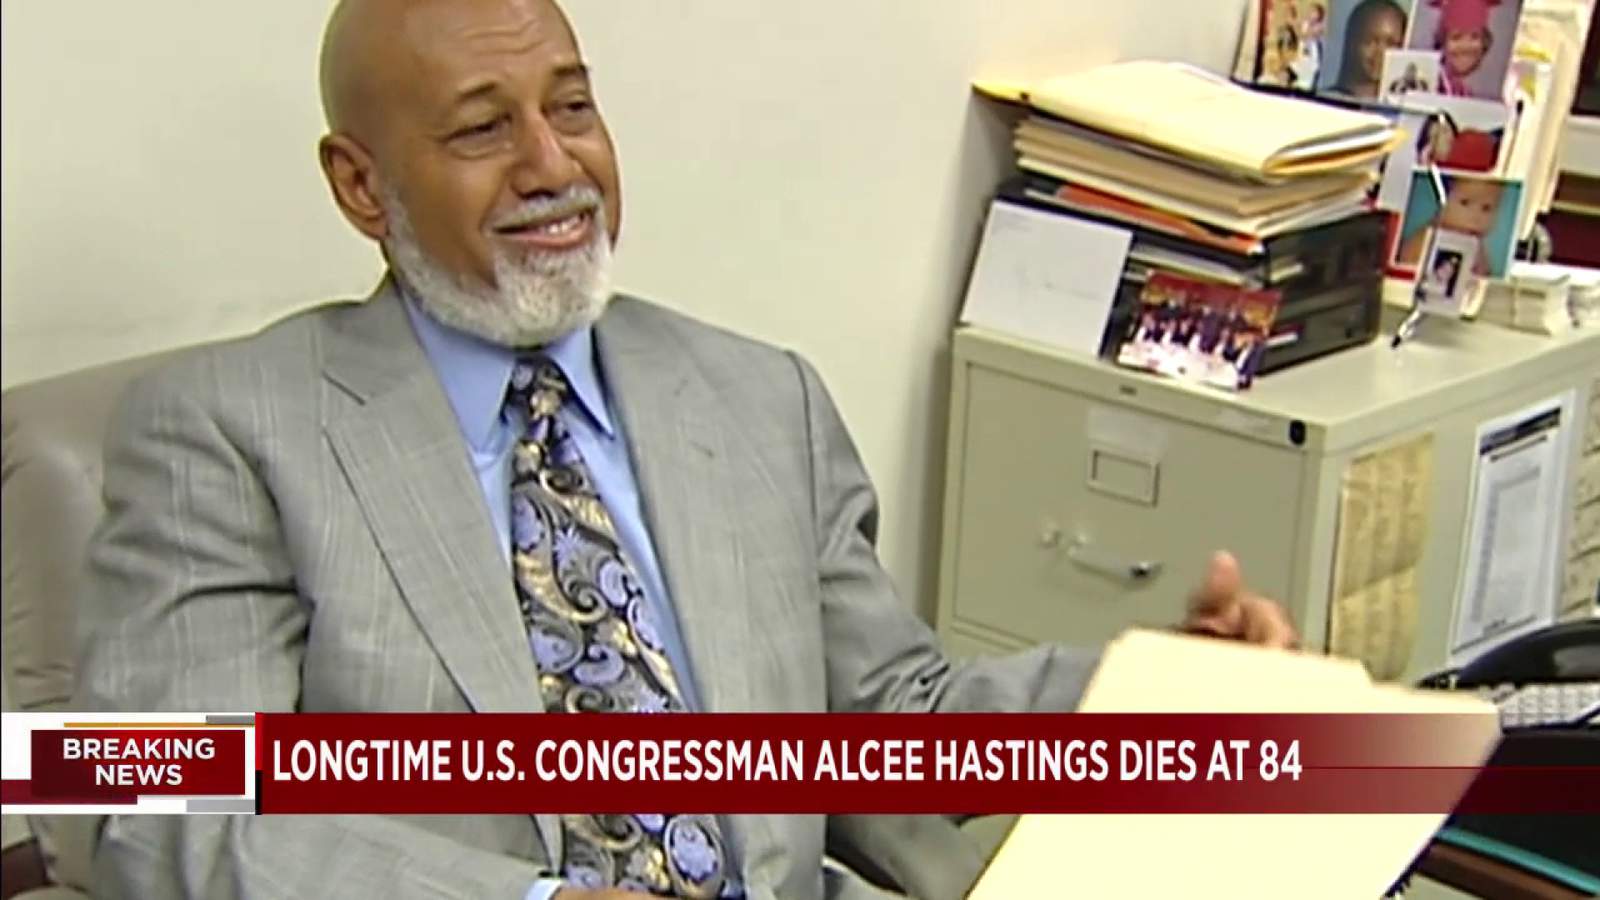 Alcee Hastings, longtime Congressman from South Florida, dies at 84